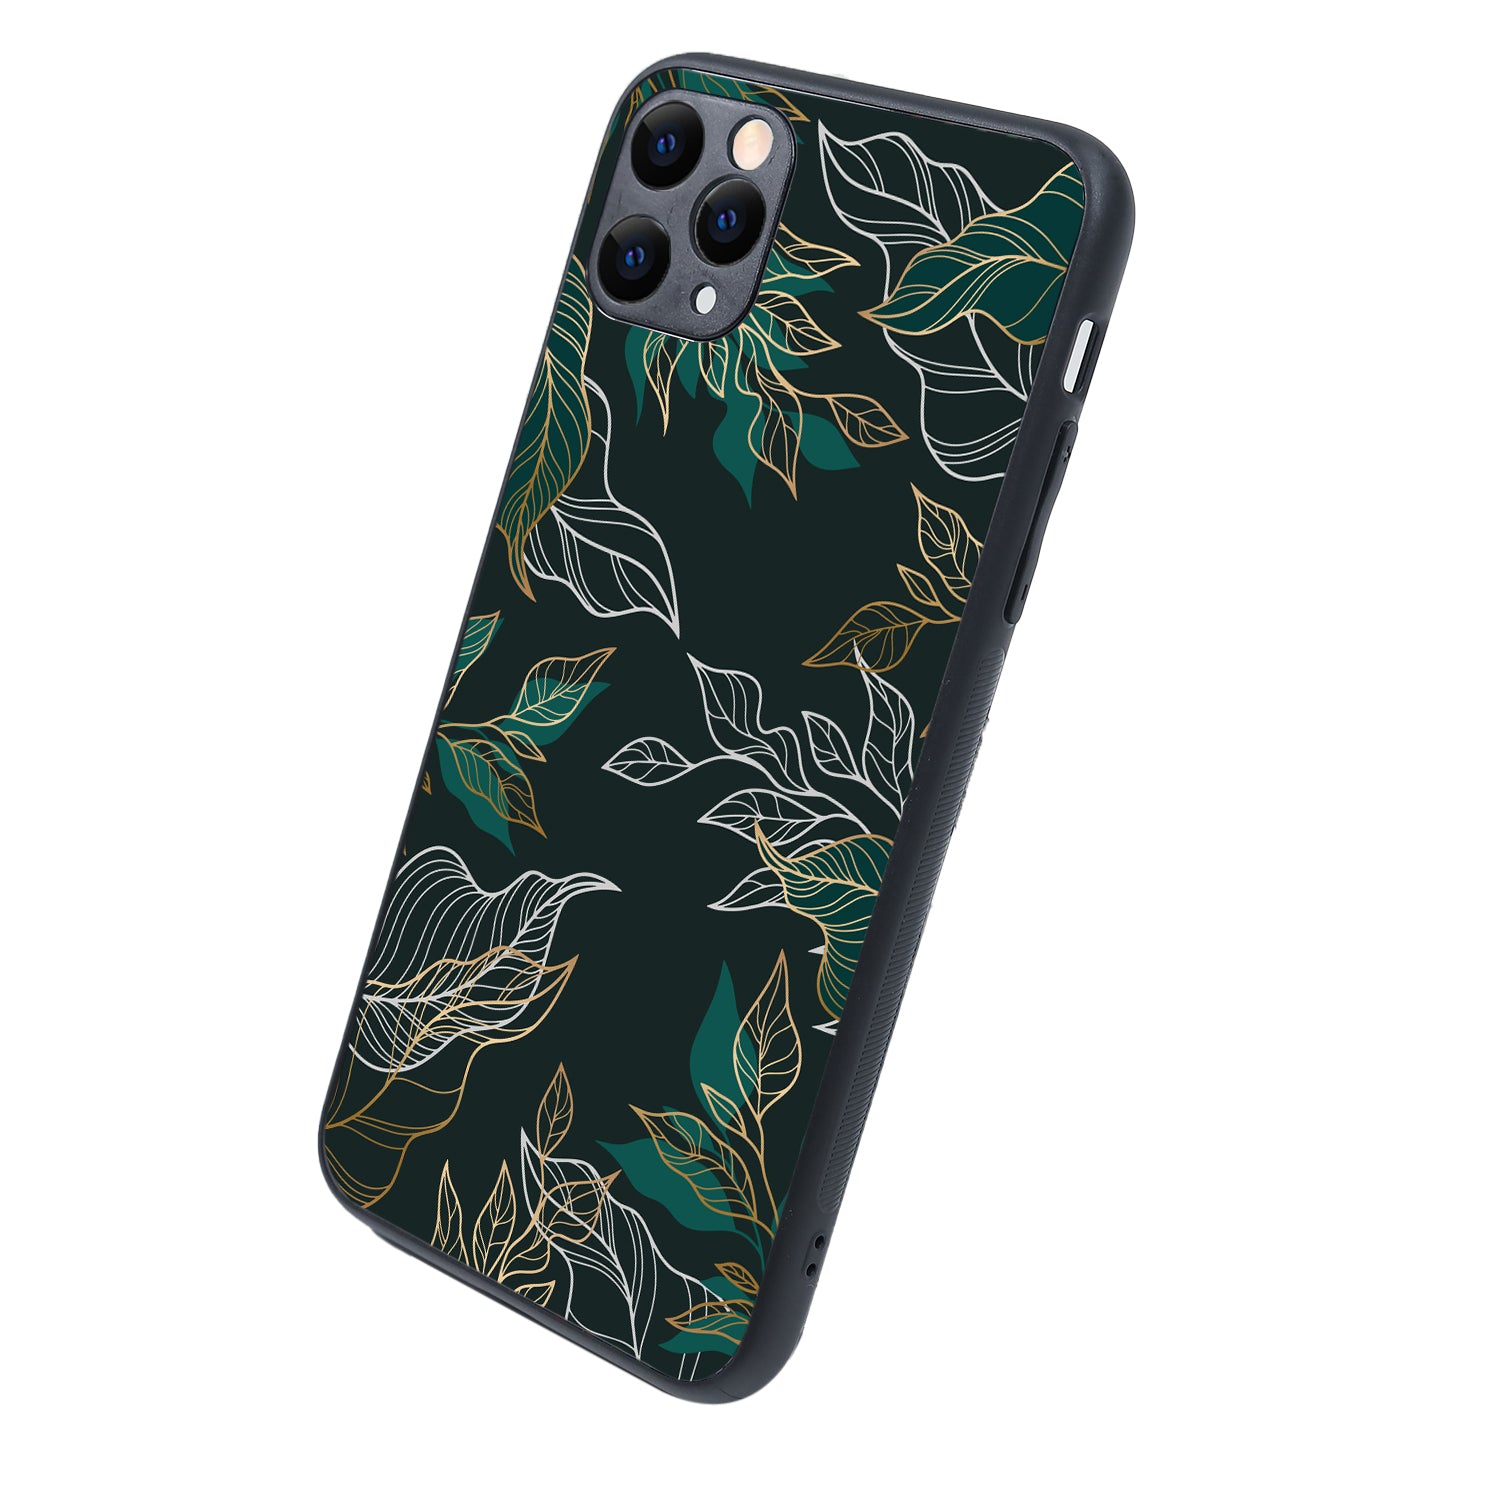 Green Floral iPhone 11 Pro Max Case